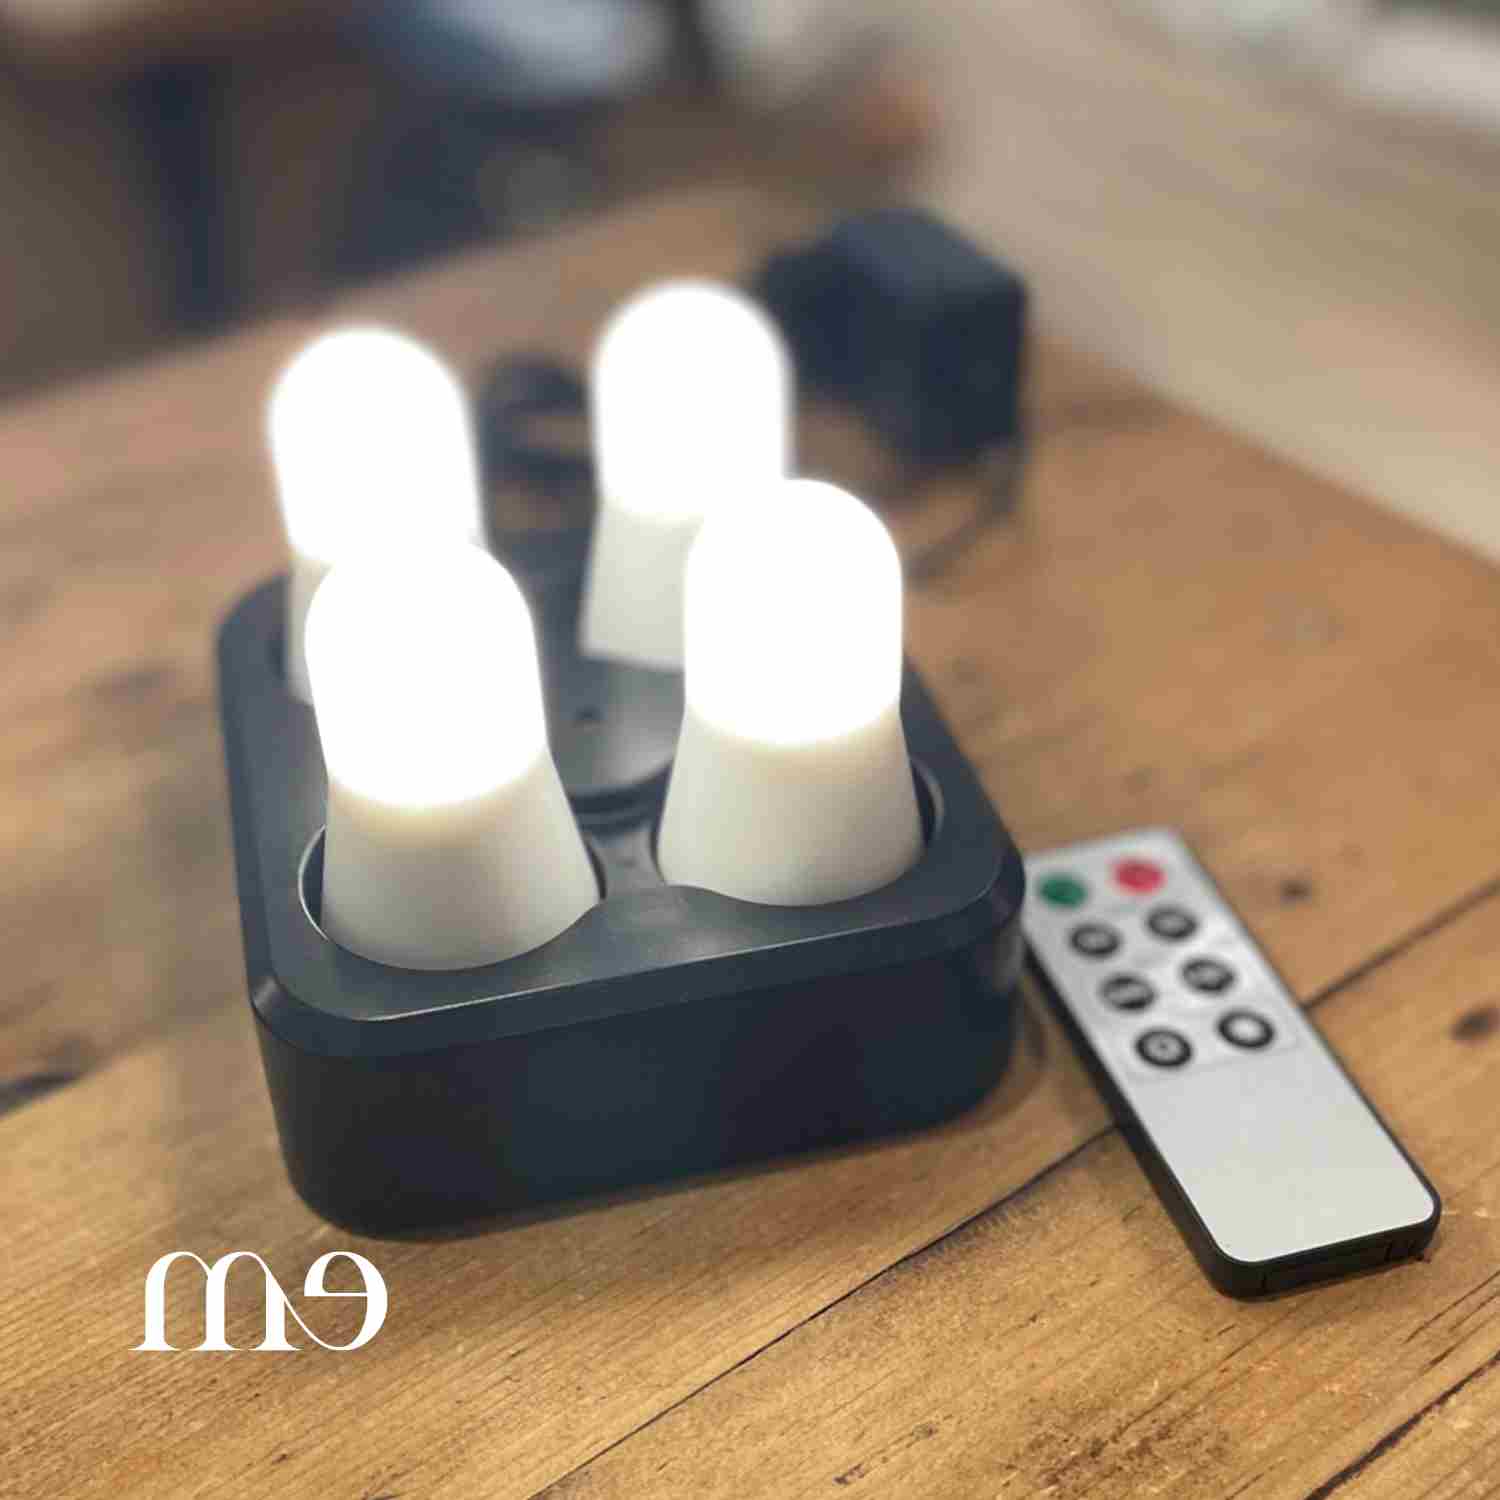 Set 2 bougies LED rechargeables